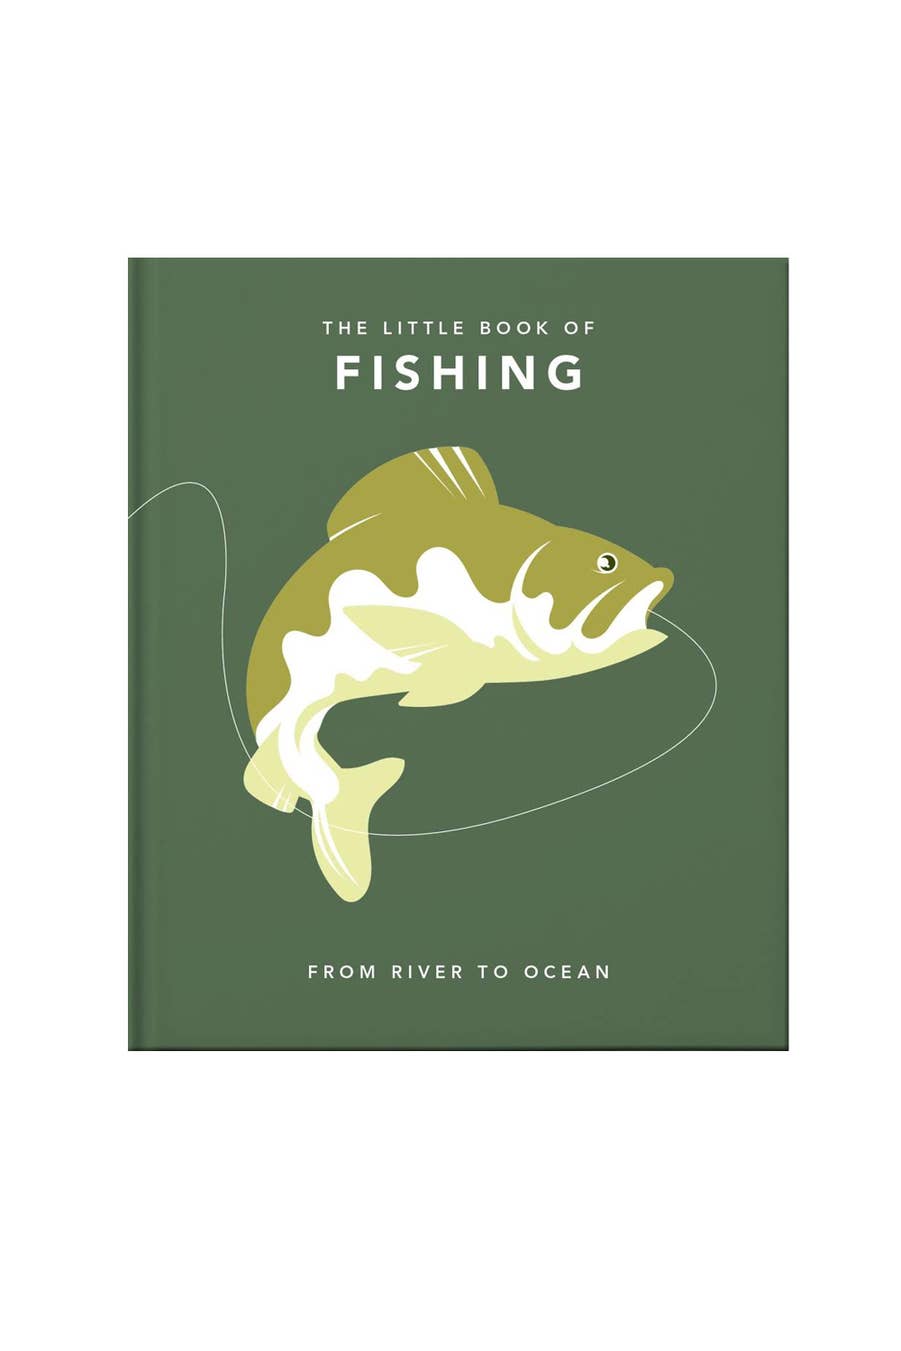 THE LITTLE BOOK OF FISHING